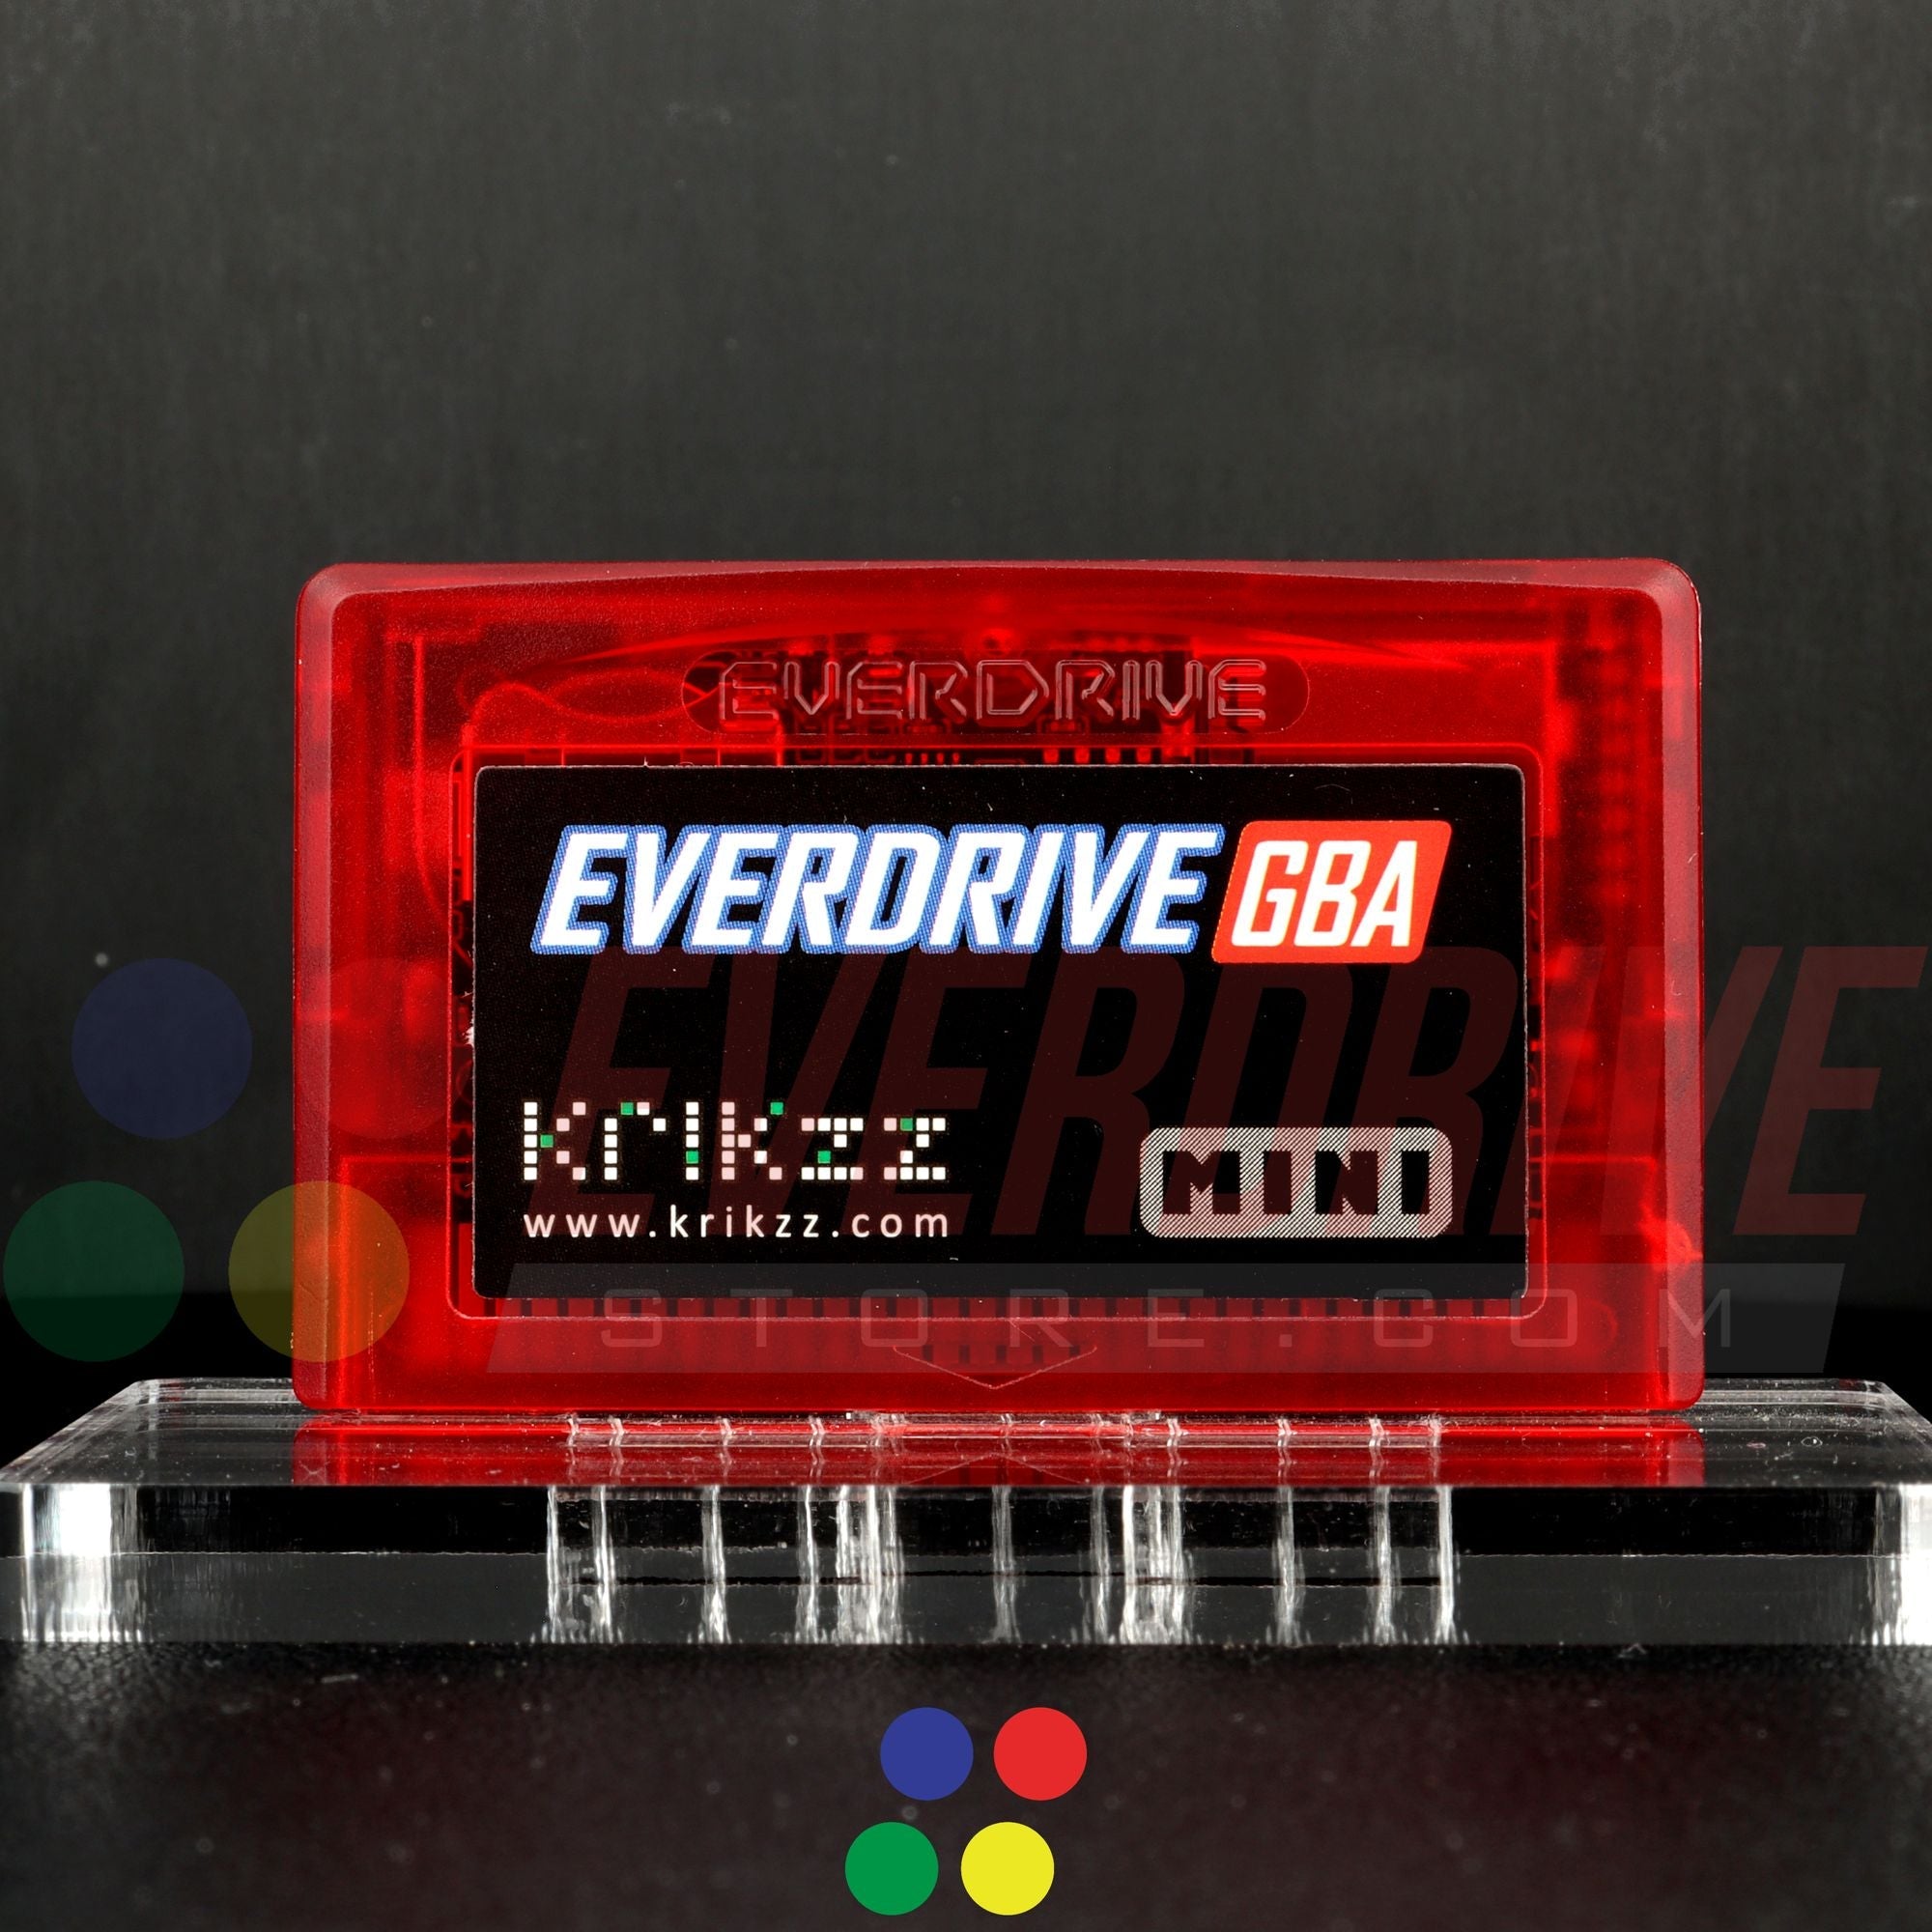 Everdrive GBA Mini - Frosted Red – EverdriveStore.com